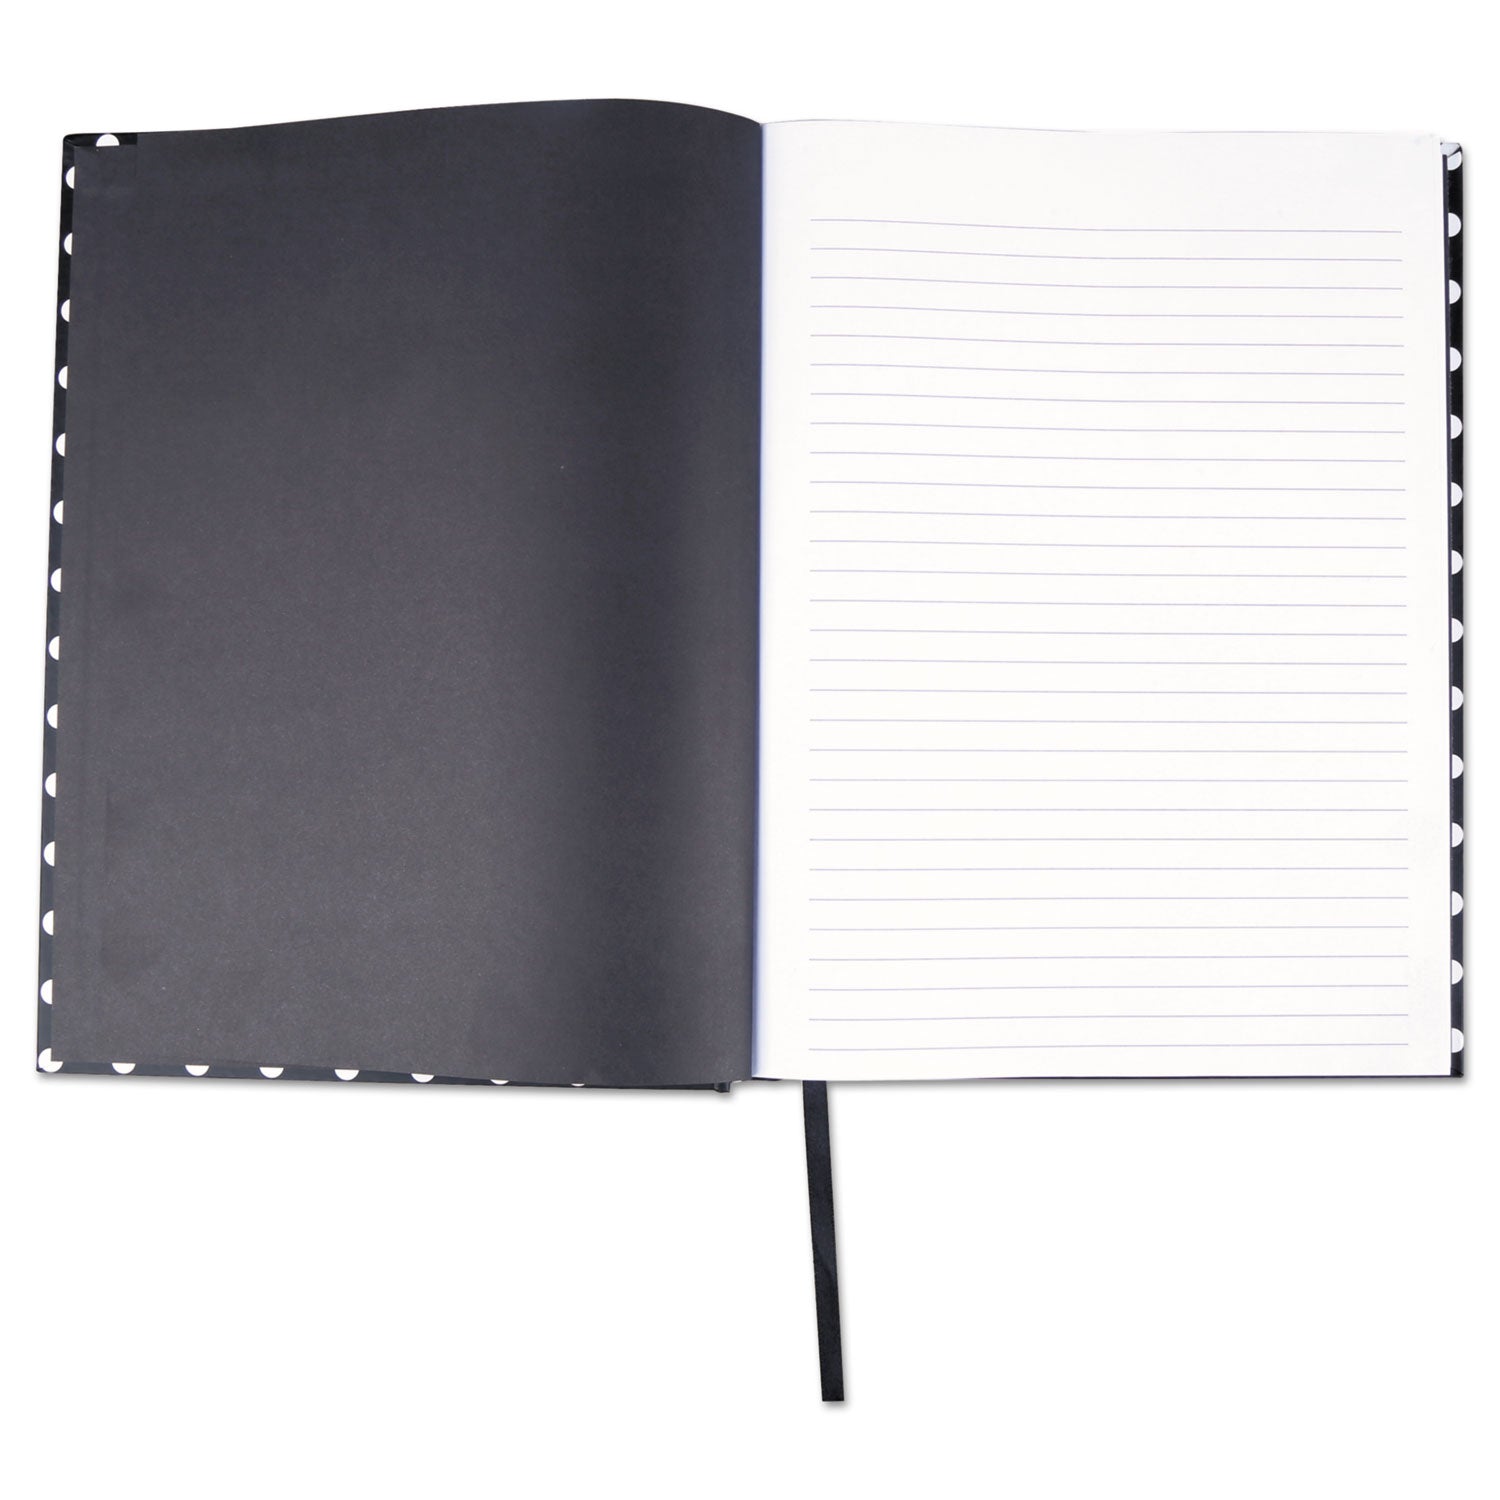 casebound-hardcover-notebook-1-subject-wide-legal-rule-black-white-cover-150-1025-x-763-sheets_unv66350 - 3